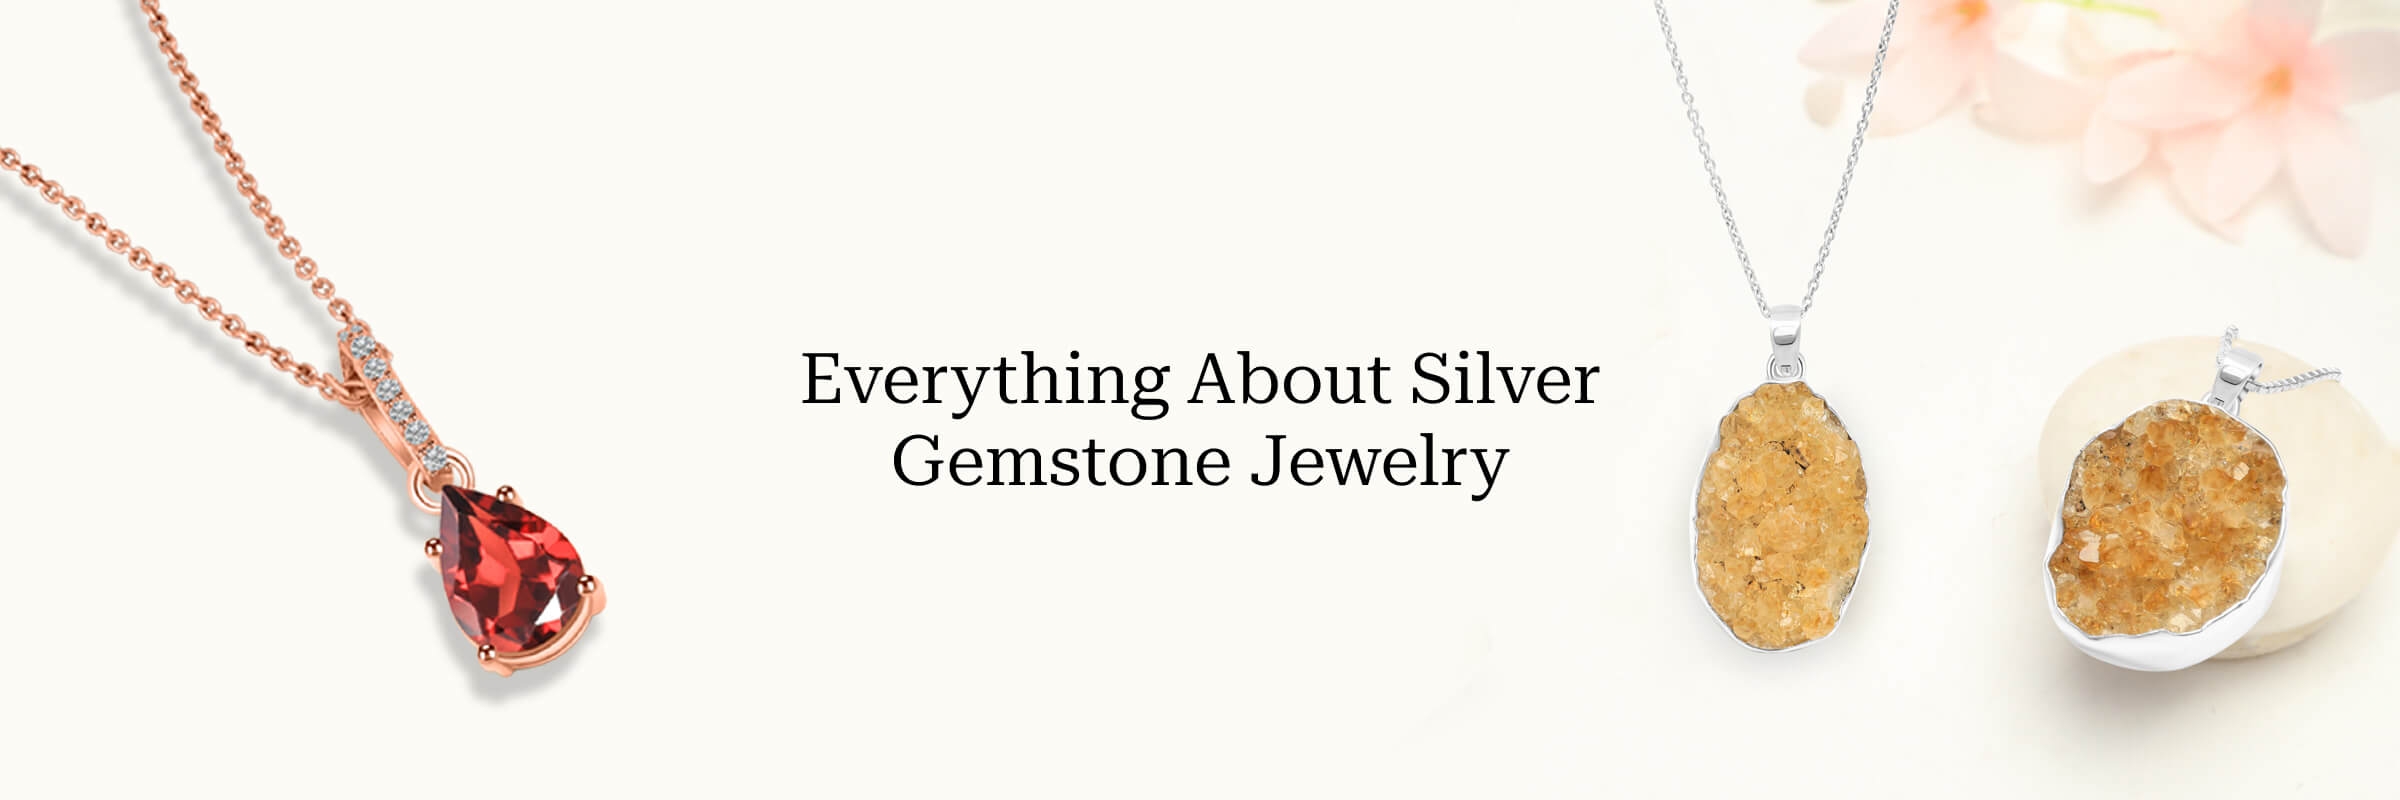 Everything about silver gemstone jewelry